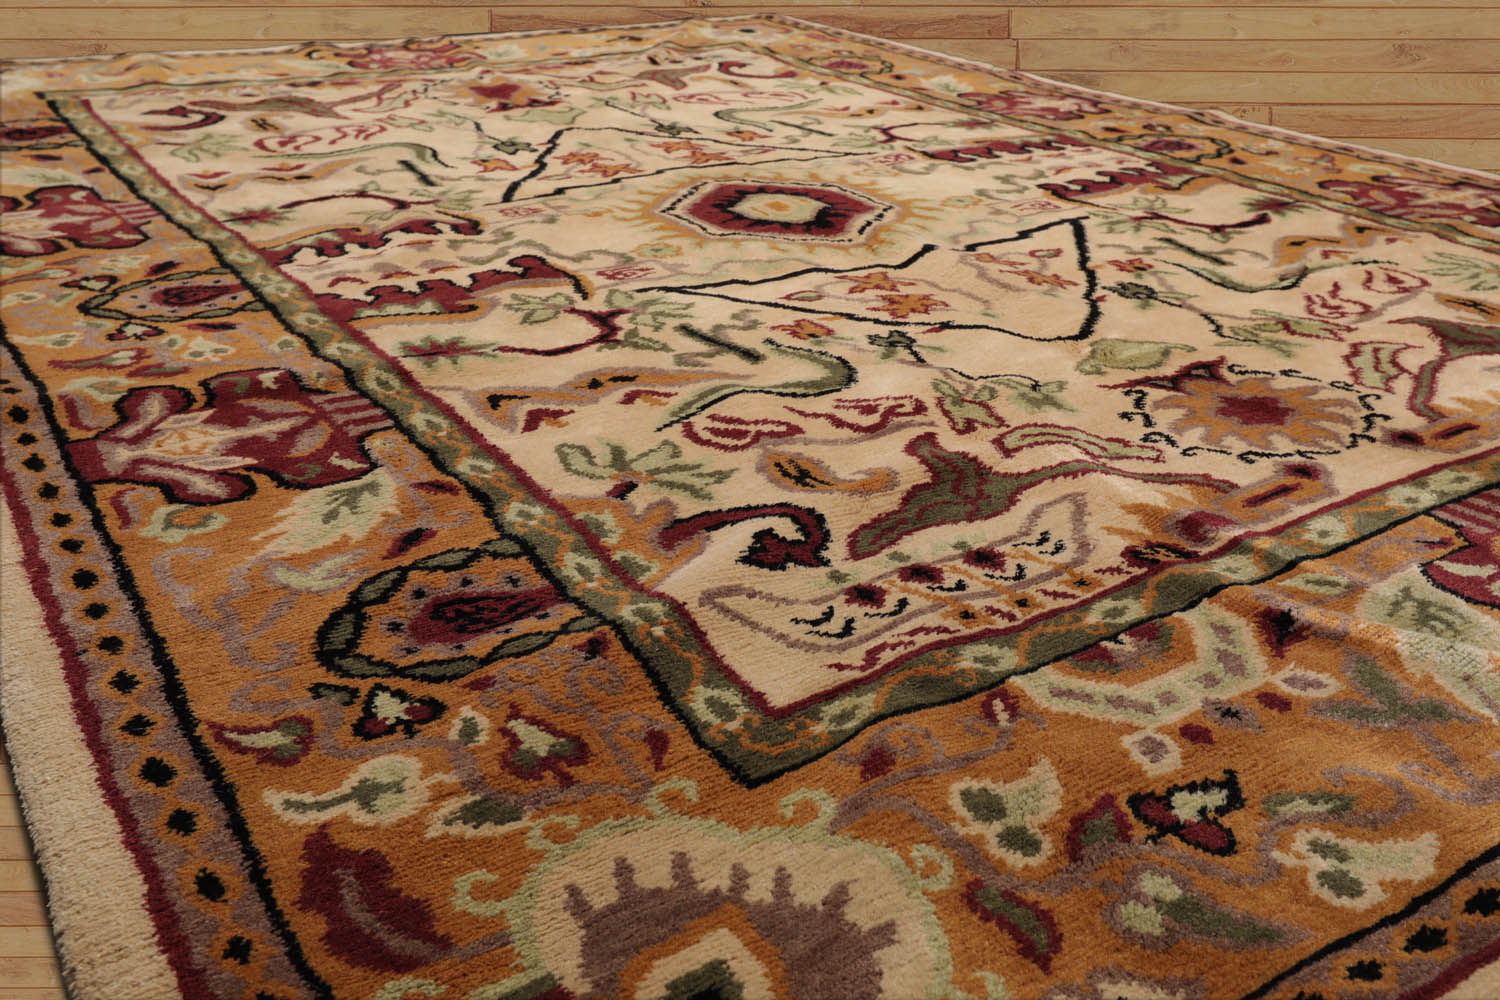 Lubov 5x7 Hand Knotted Tibetan 100% Wool Traditional Oriental Area Rug Beige, Tan Color